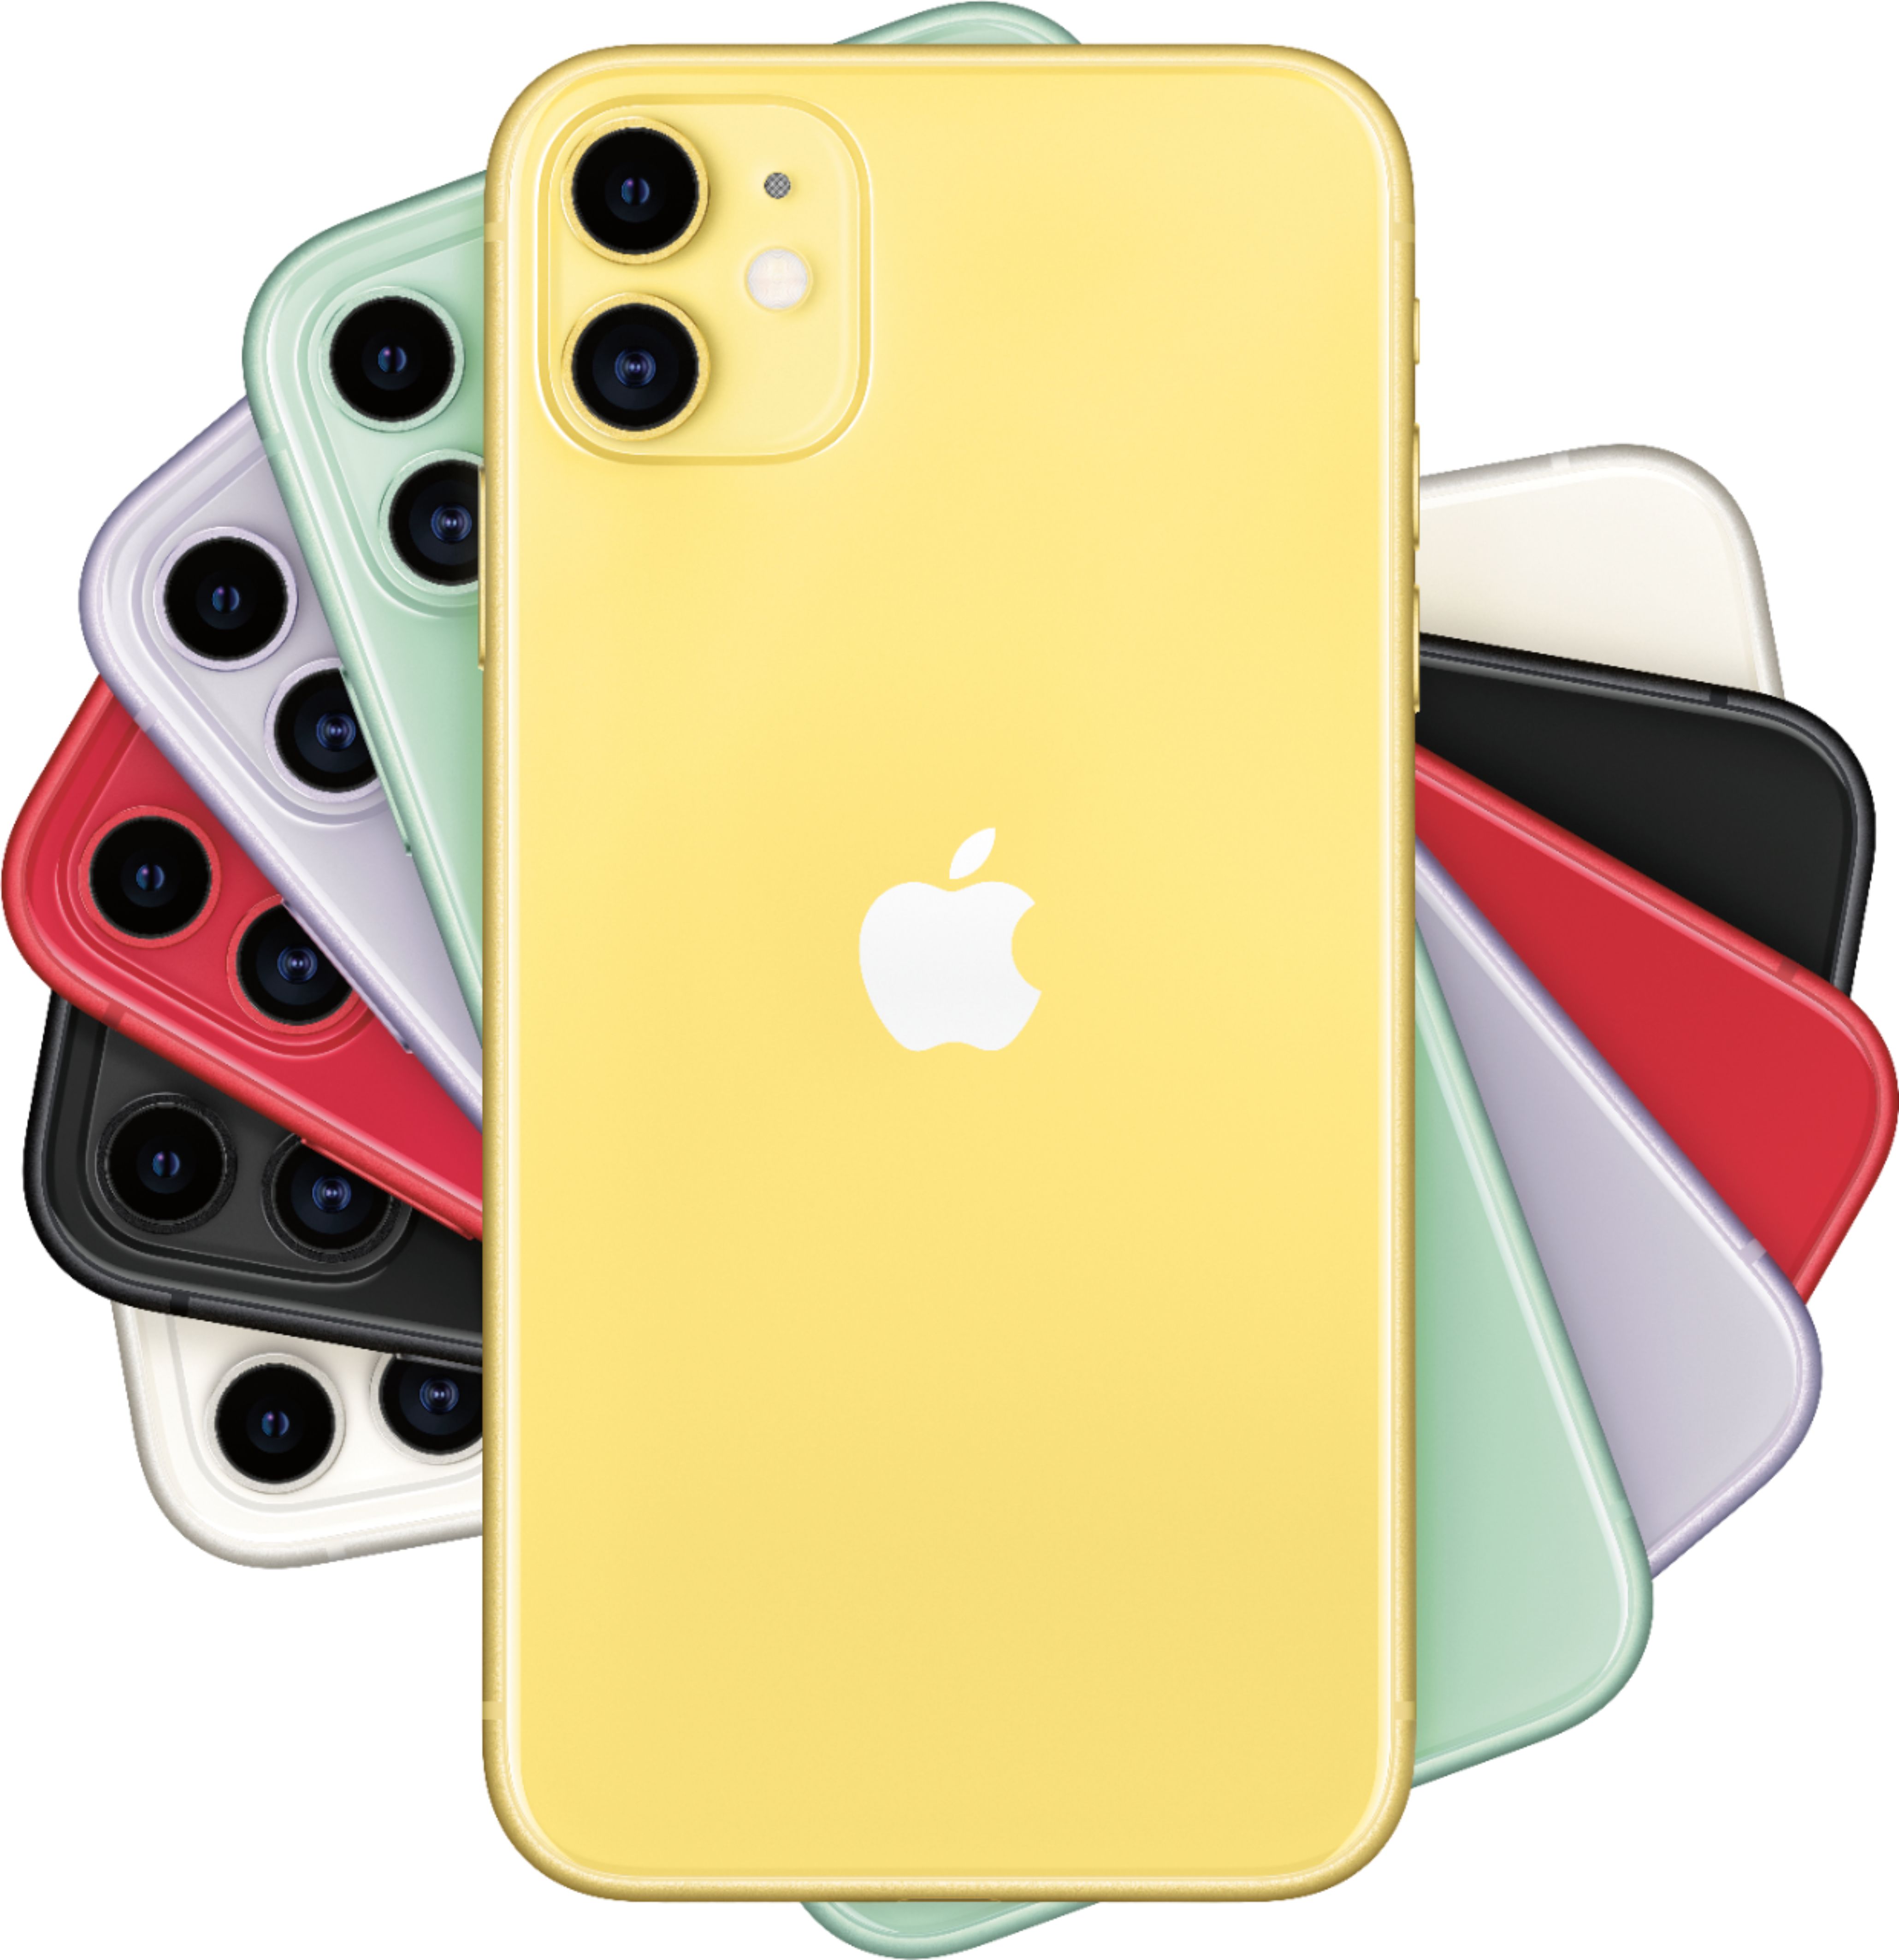 Apple iphone 11 128gb yellow dionex ultimate 3000